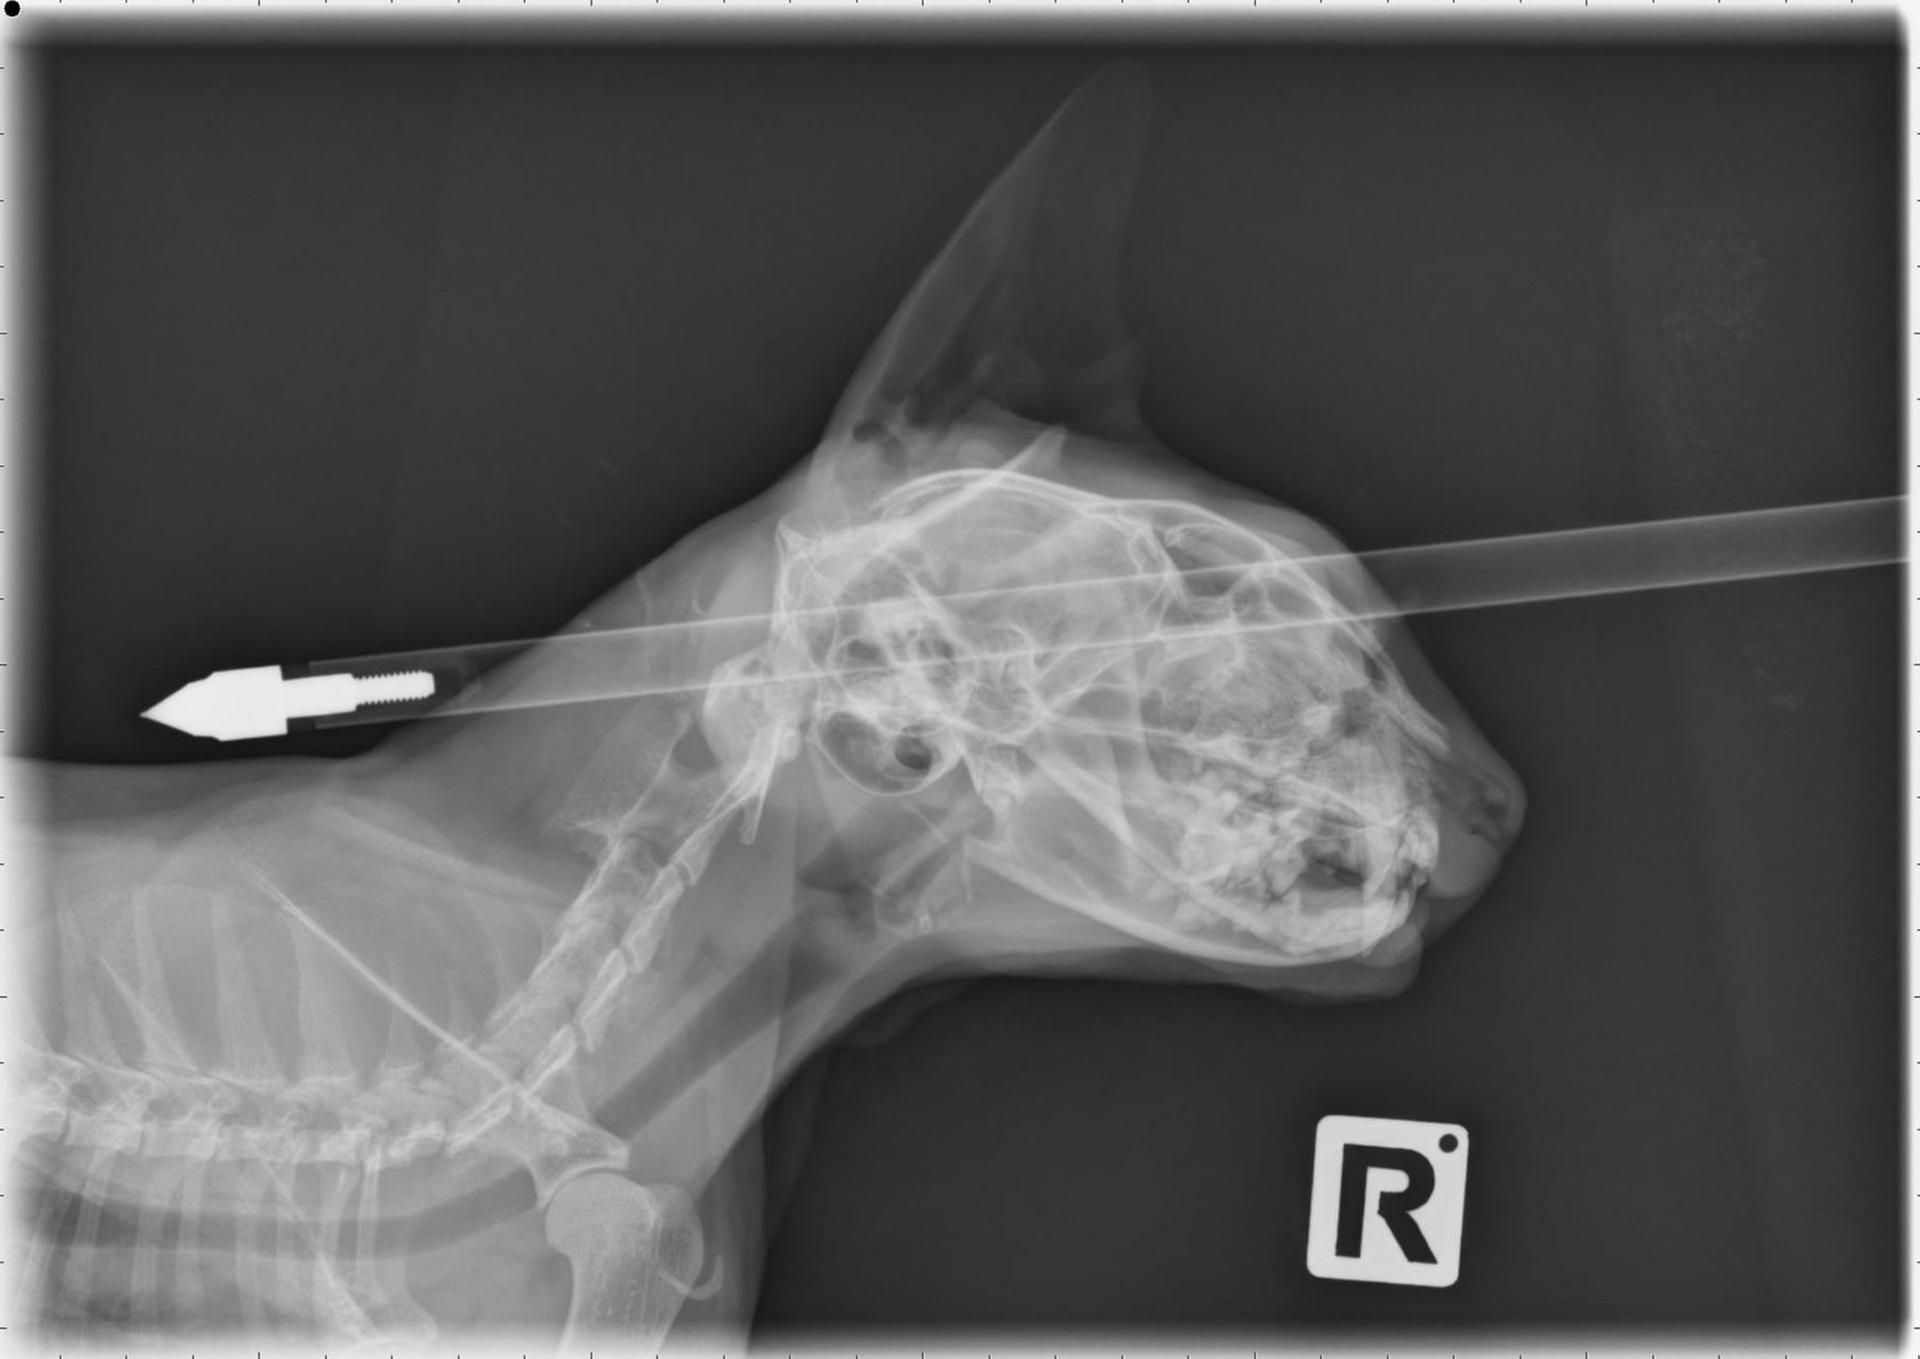 The bolt was successfully removed by a veterinary surgeon